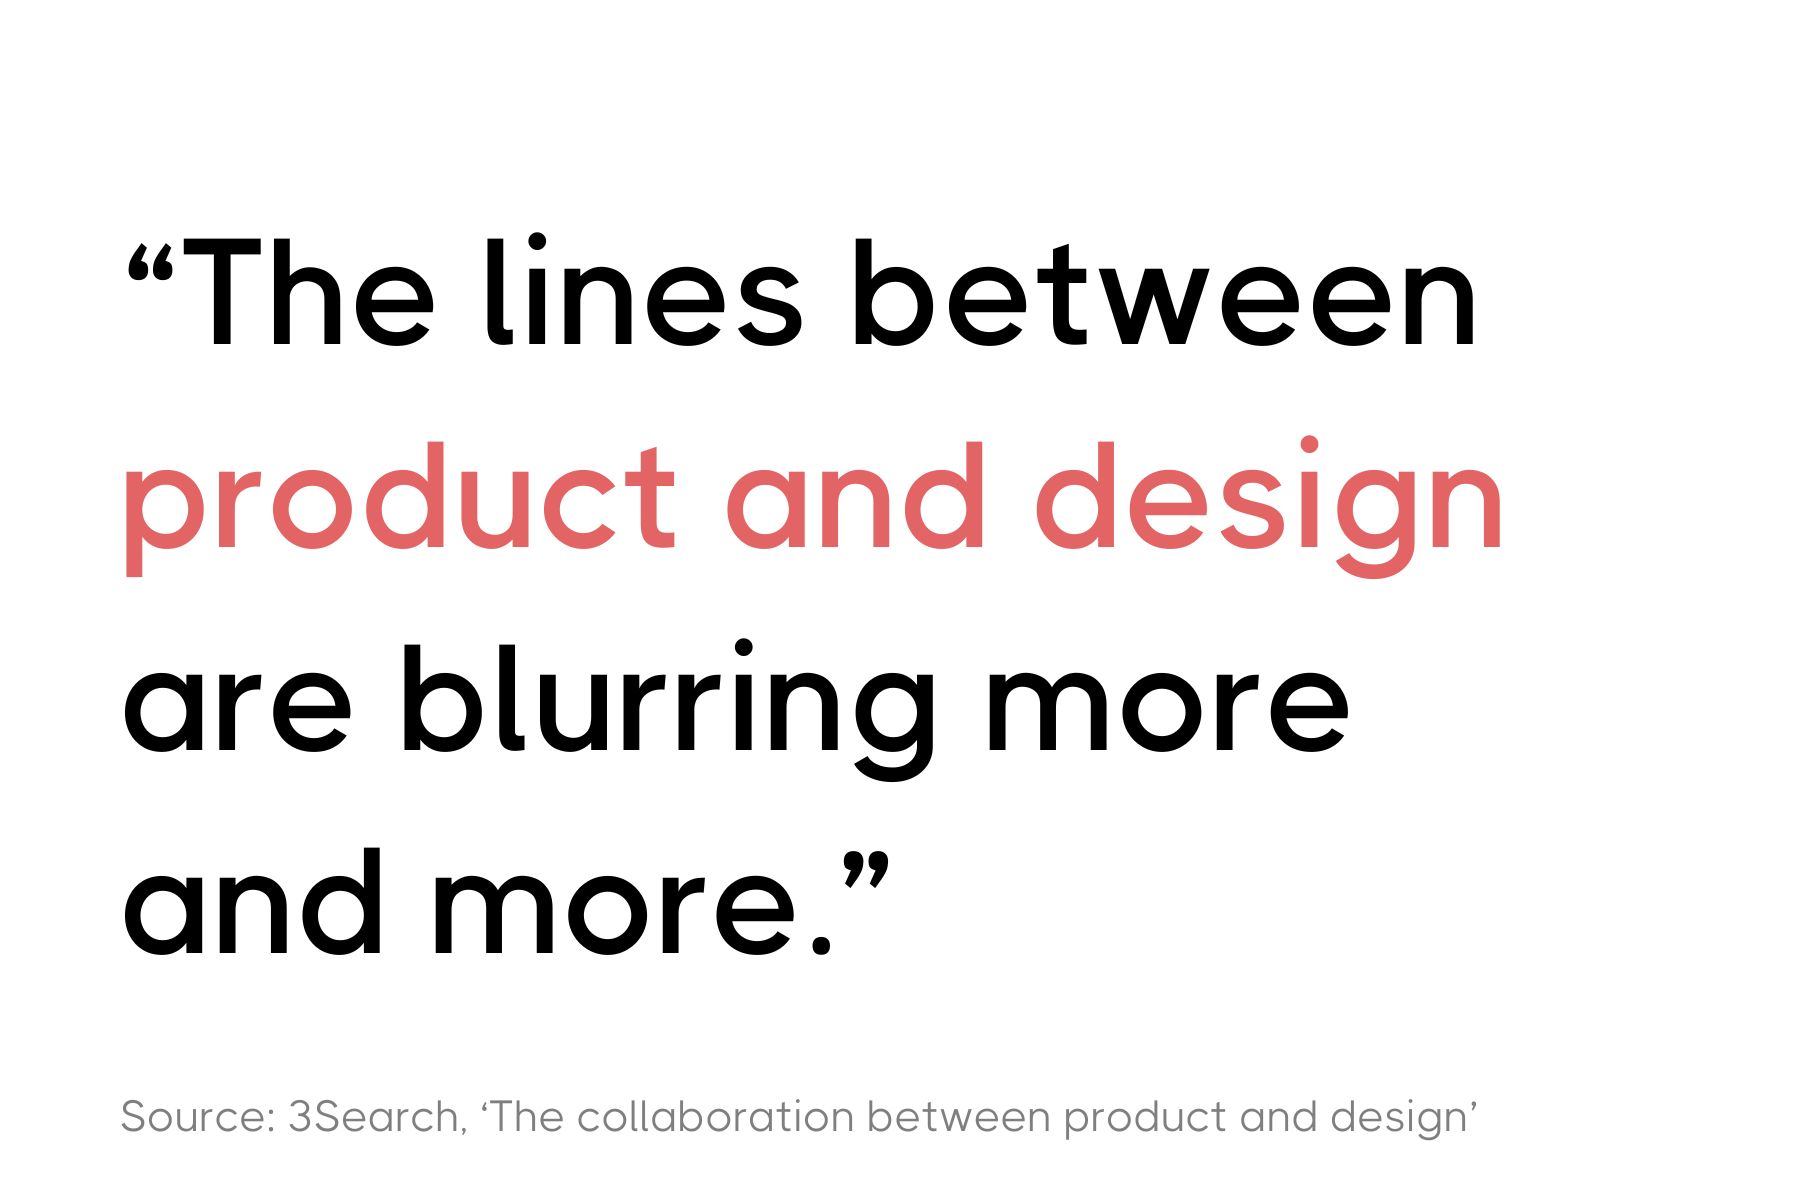 A straightforward graphic featuring the quote: "The lines between product and design are blurring more and more." Text is styled in red and black and cited from 'The collaboration between product and design' by 3Search.